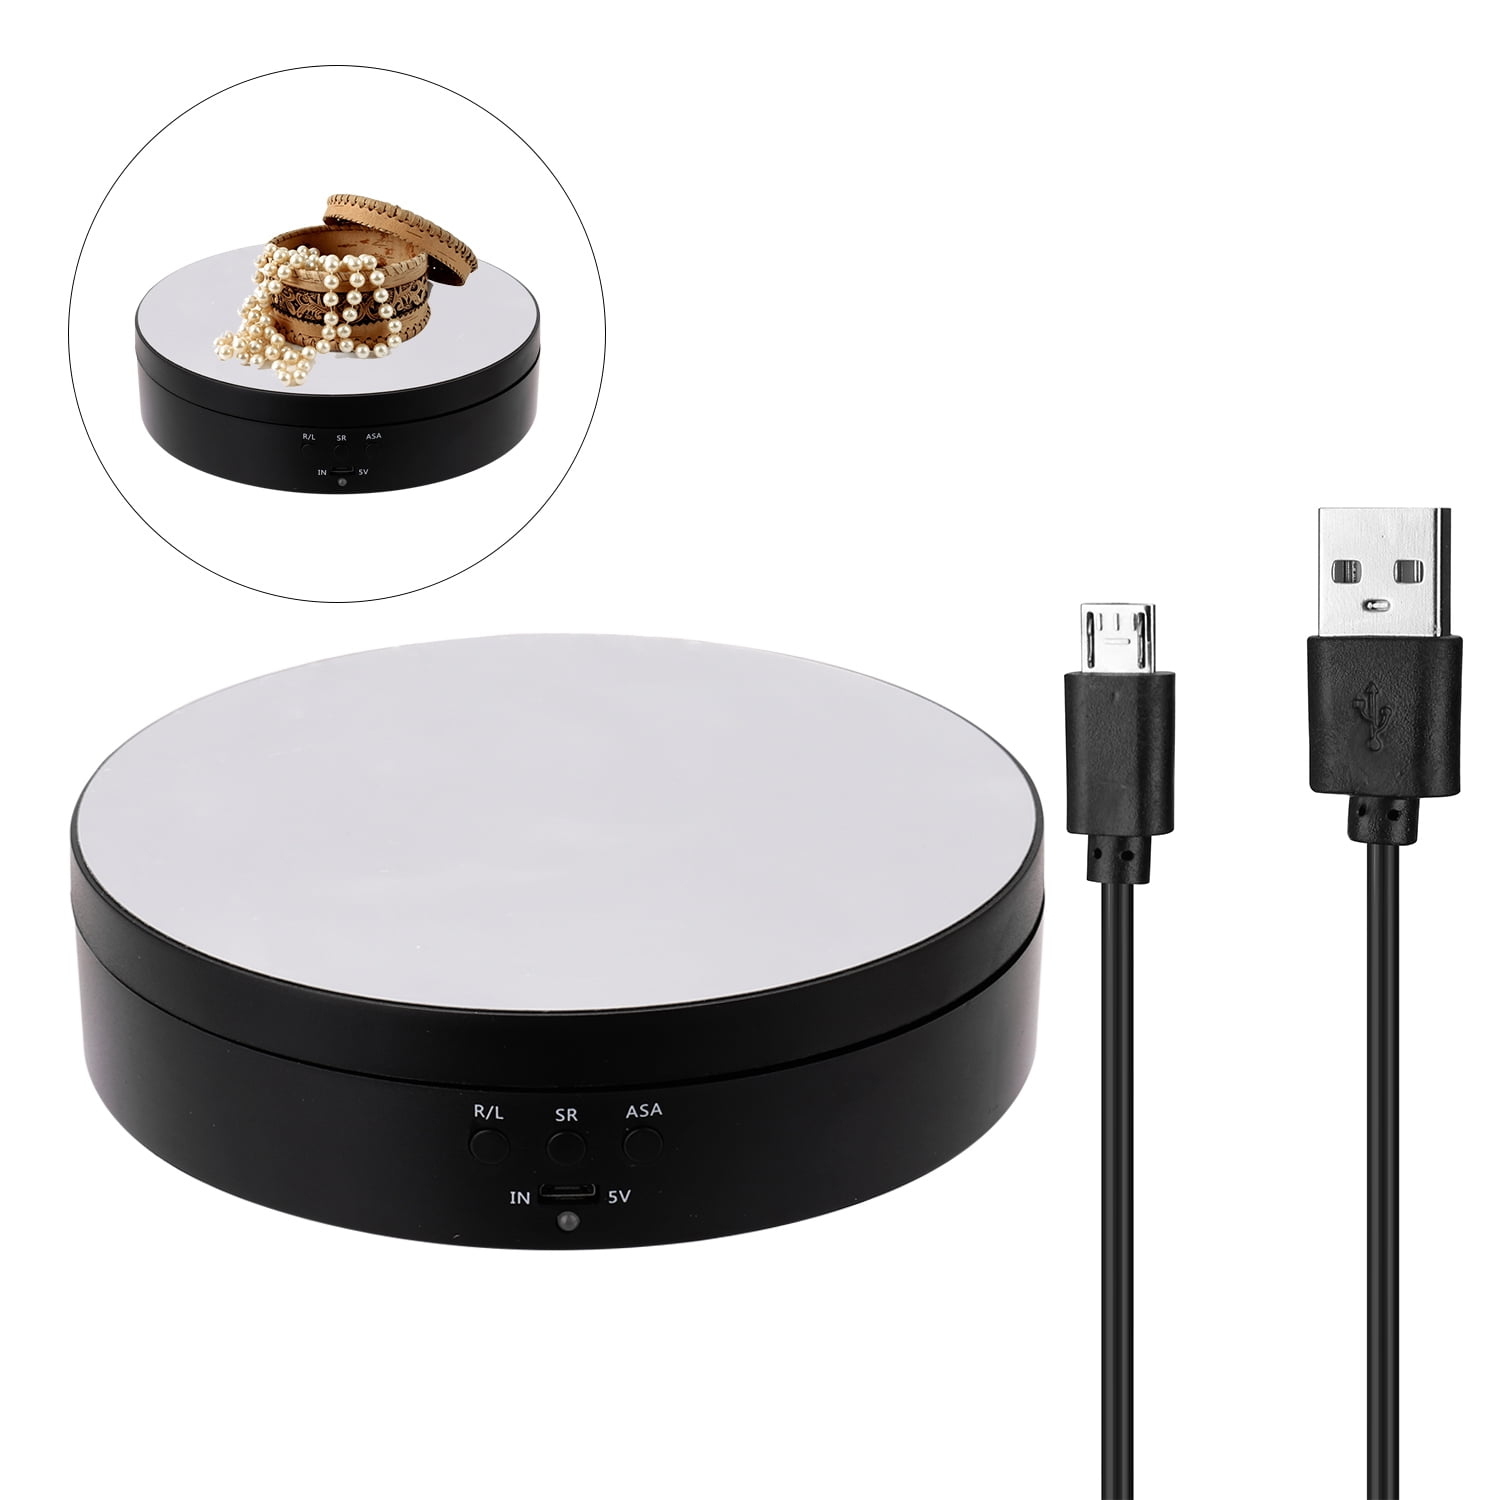 MEIDELI Electric Rotating Stand 1 Set Show 40-50db Low Noise Practical Electric  Turntable Automatic Rotating Jewellery Holder 